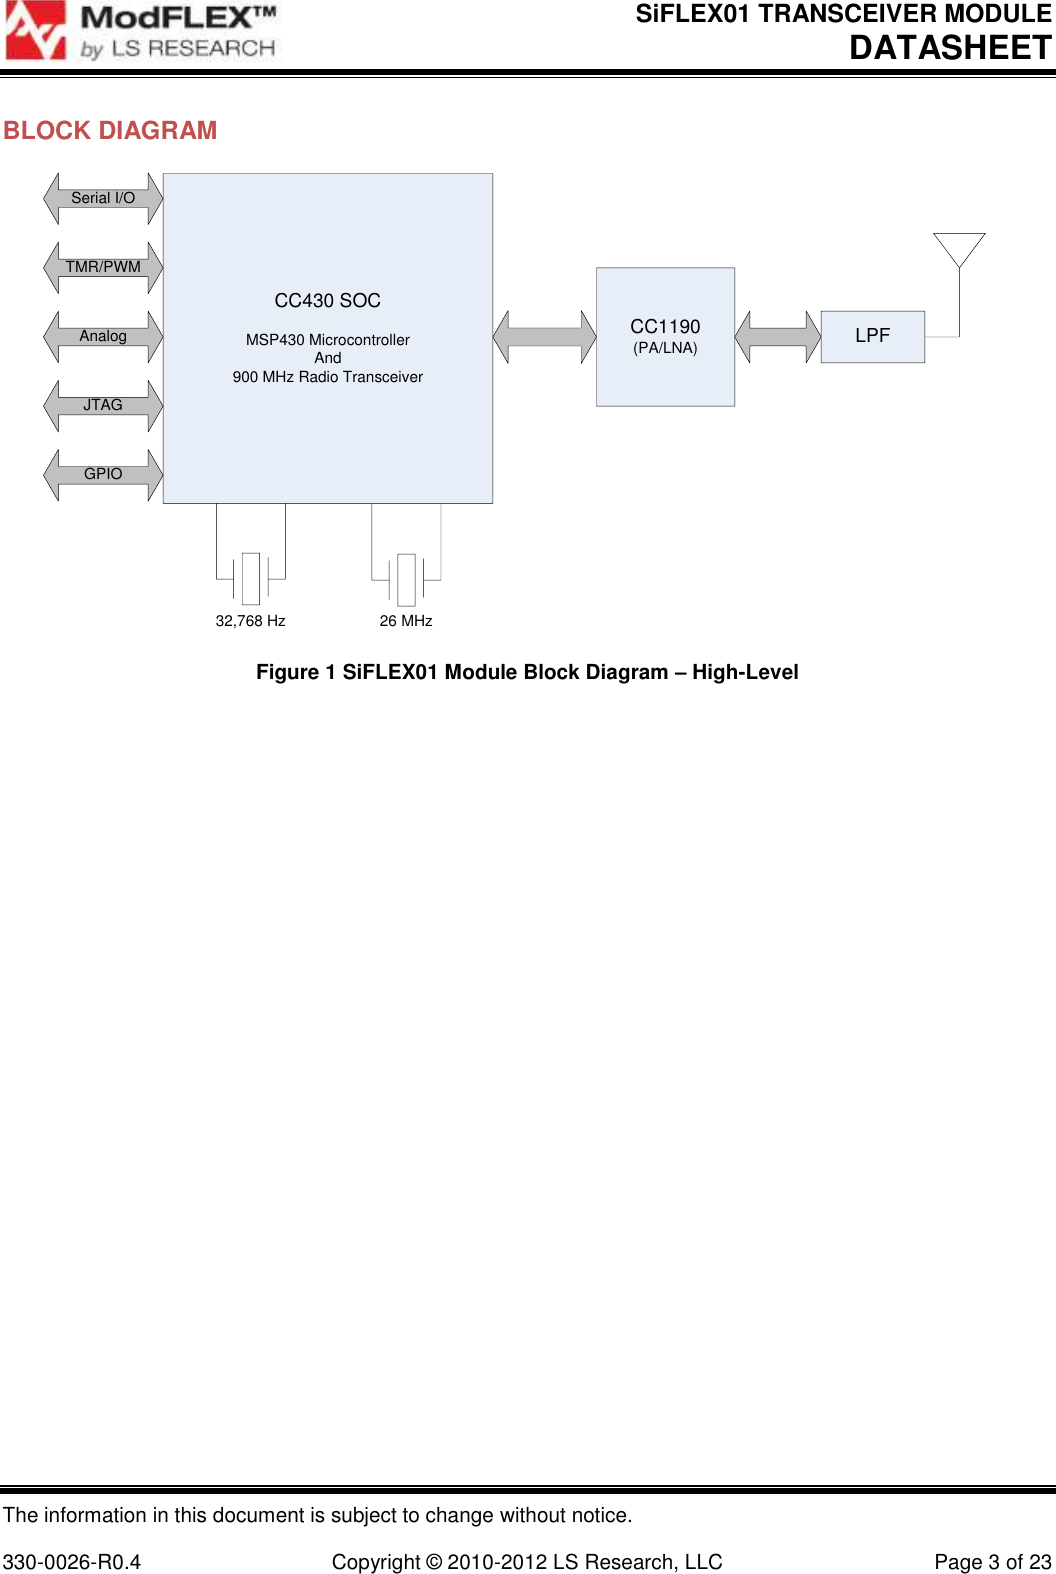 SiFLEX01 TRANSCEIVER MODULE DATASHEET The information in this document is subject to change without notice.  330-0026-R0.4  Copyright © 2010-2012 LS Research, LLC  Page 3 of 23 BLOCK DIAGRAM CC430 SOCMSP430 MicrocontrollerAnd900 MHz Radio TransceiverCC1190(PA/LNA)AnalogJTAGTMR/PWM32,768 Hz 26 MHzLPFGPIOSerial I/O Figure 1 SiFLEX01 Module Block Diagram – High-Level   